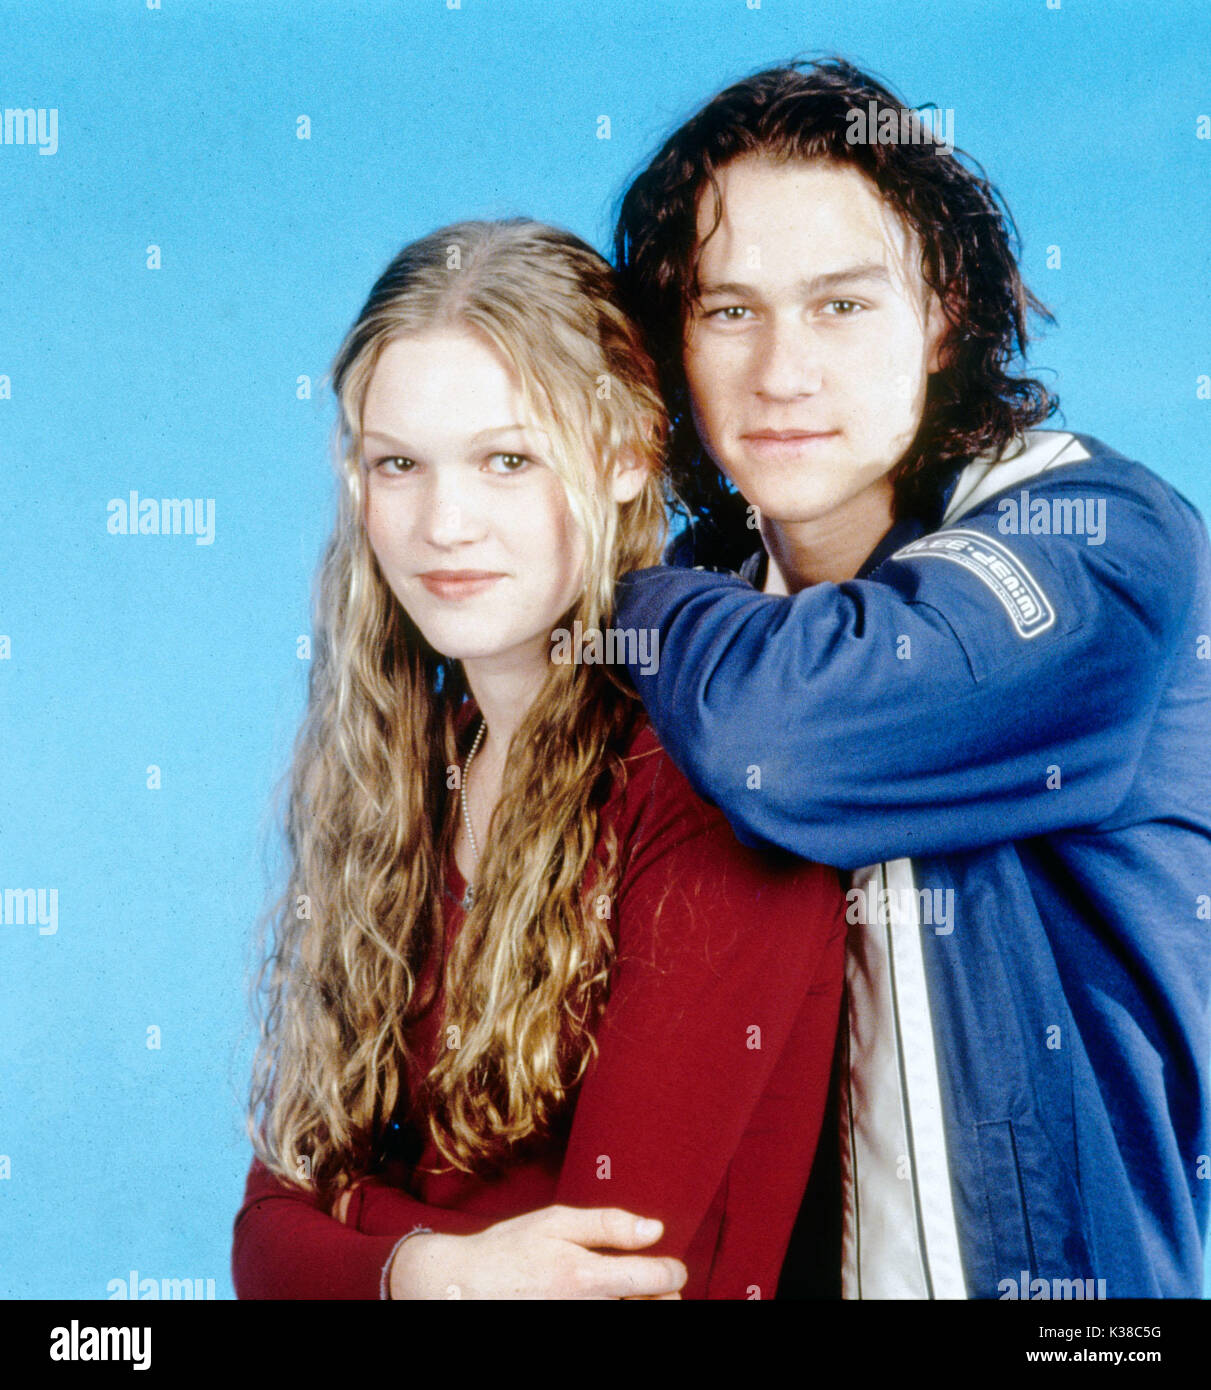 10 THINGS I HATE ABOUT YOU JULIA STILES, Heath Ledger Date : 1999 Banque D'Images